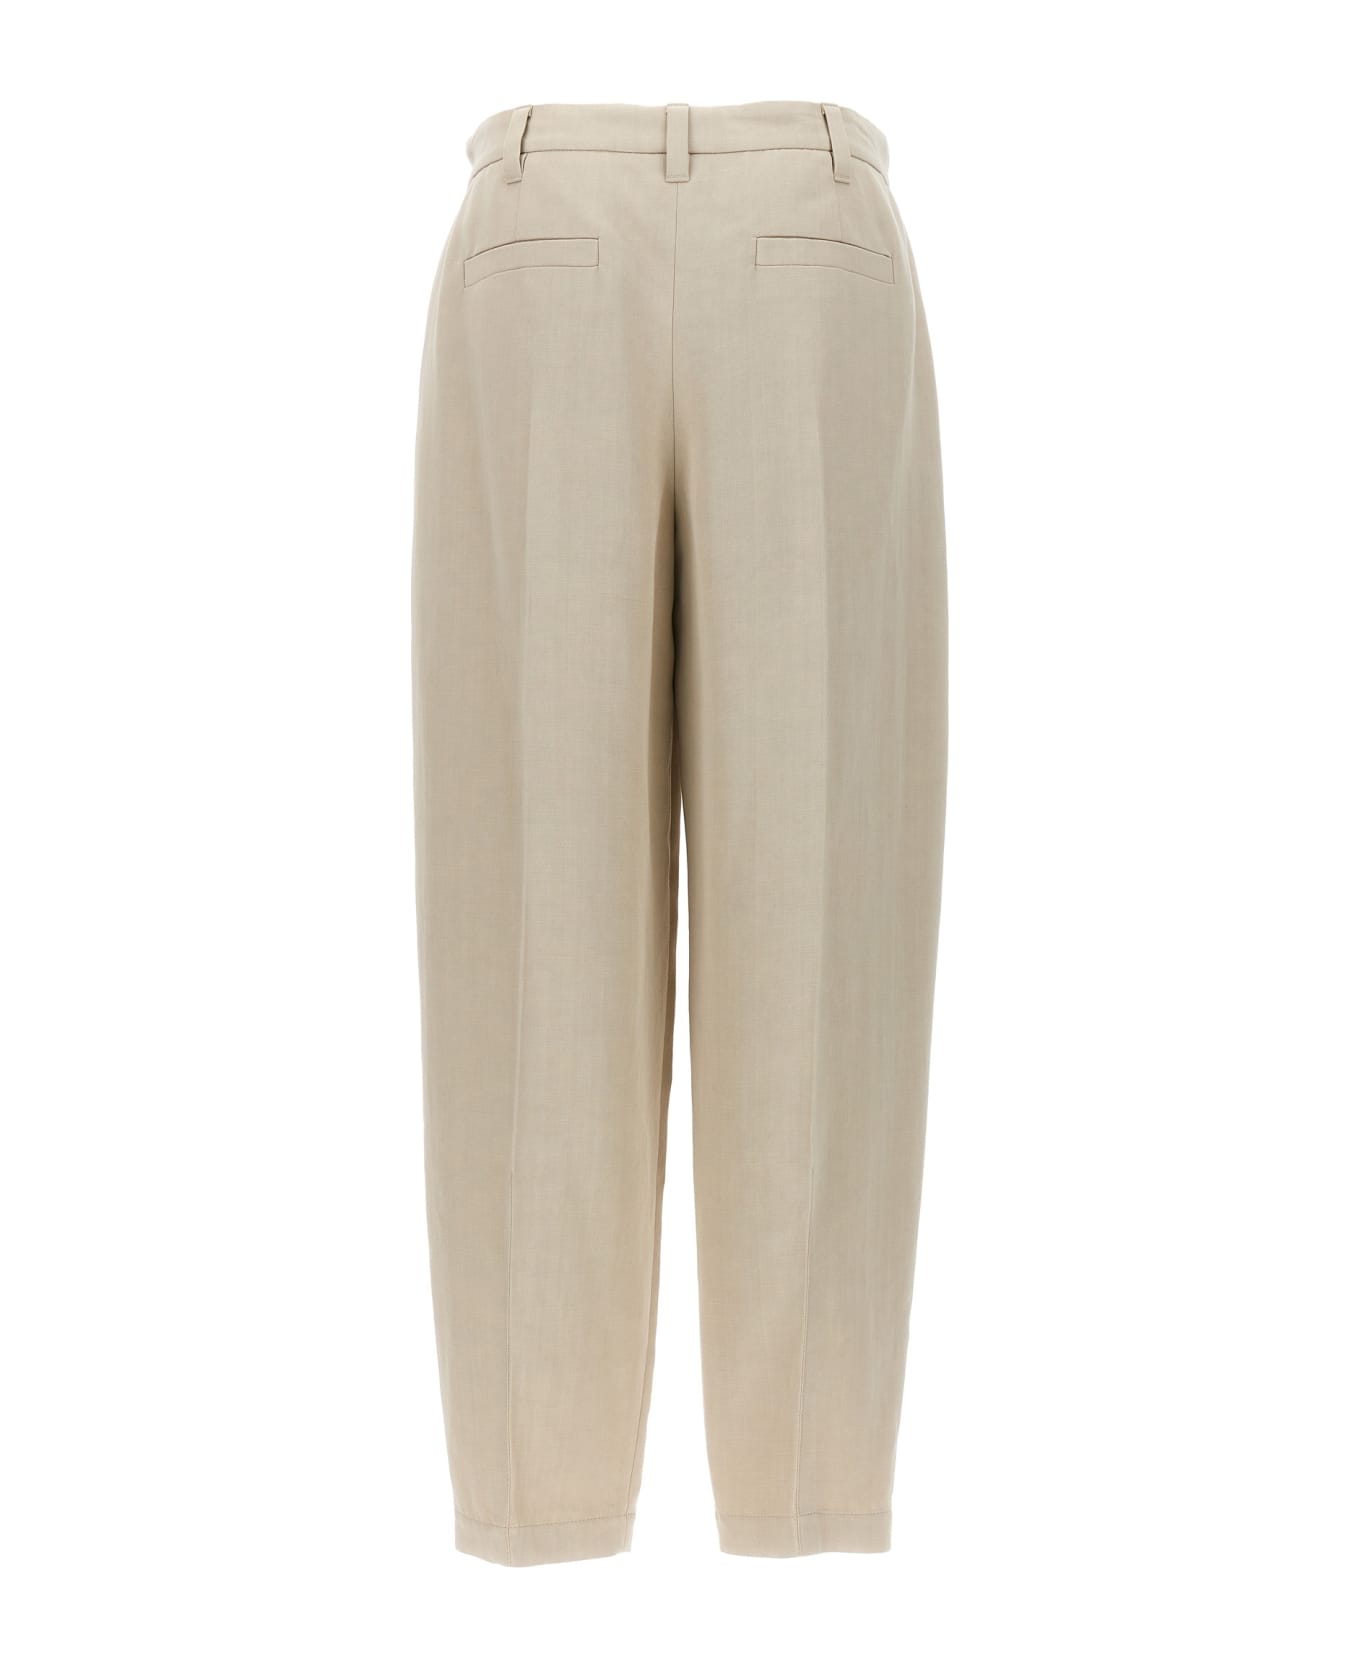 Brunello Cucinelli Pants With Front Pleats - Sand